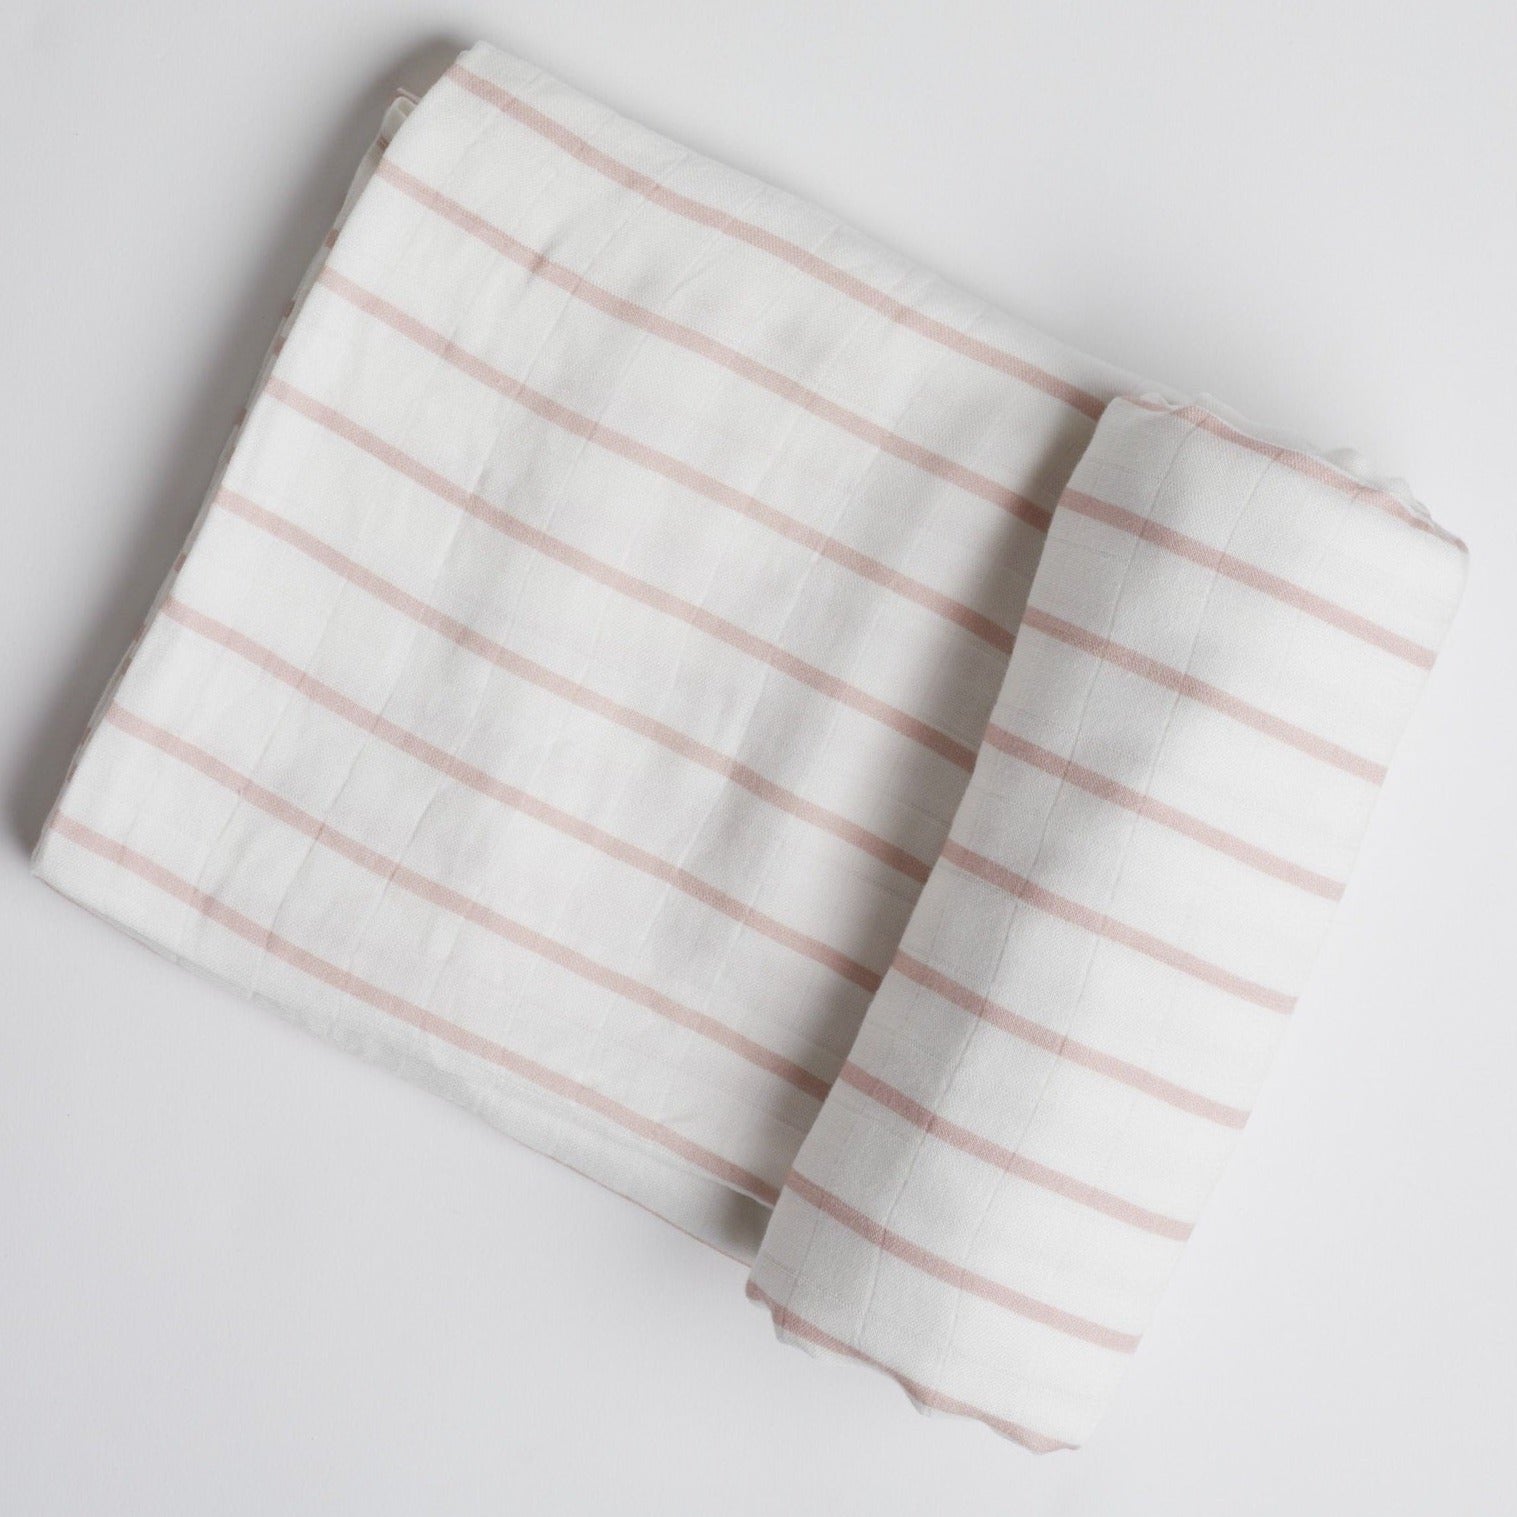 Blossom Pink Stripe Swaddle on white background